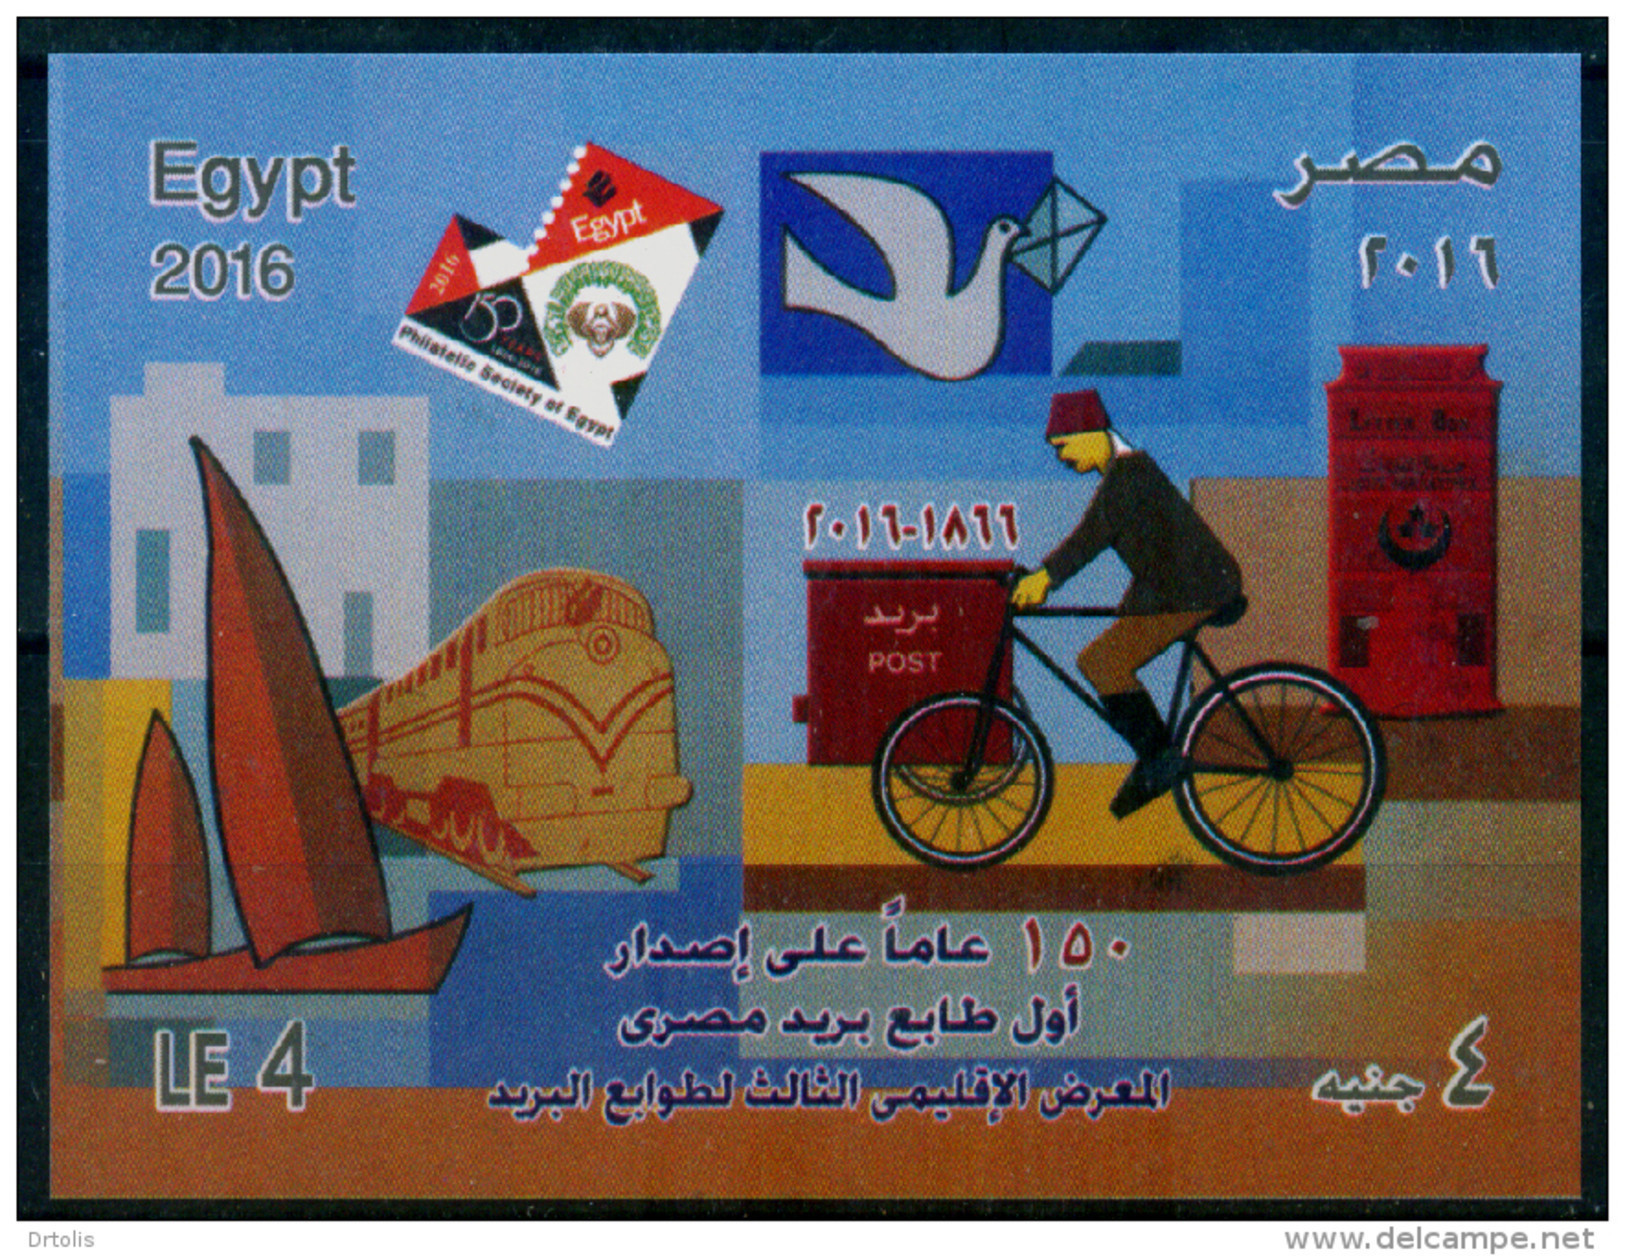 EGYPT / 2016 / POST DAY / 1ST EGYPT STAMP : 150 YEARS / BICYCLE / LETTER BOX / DIESEL TRAIN / DHOWS / MNH / VF - Neufs